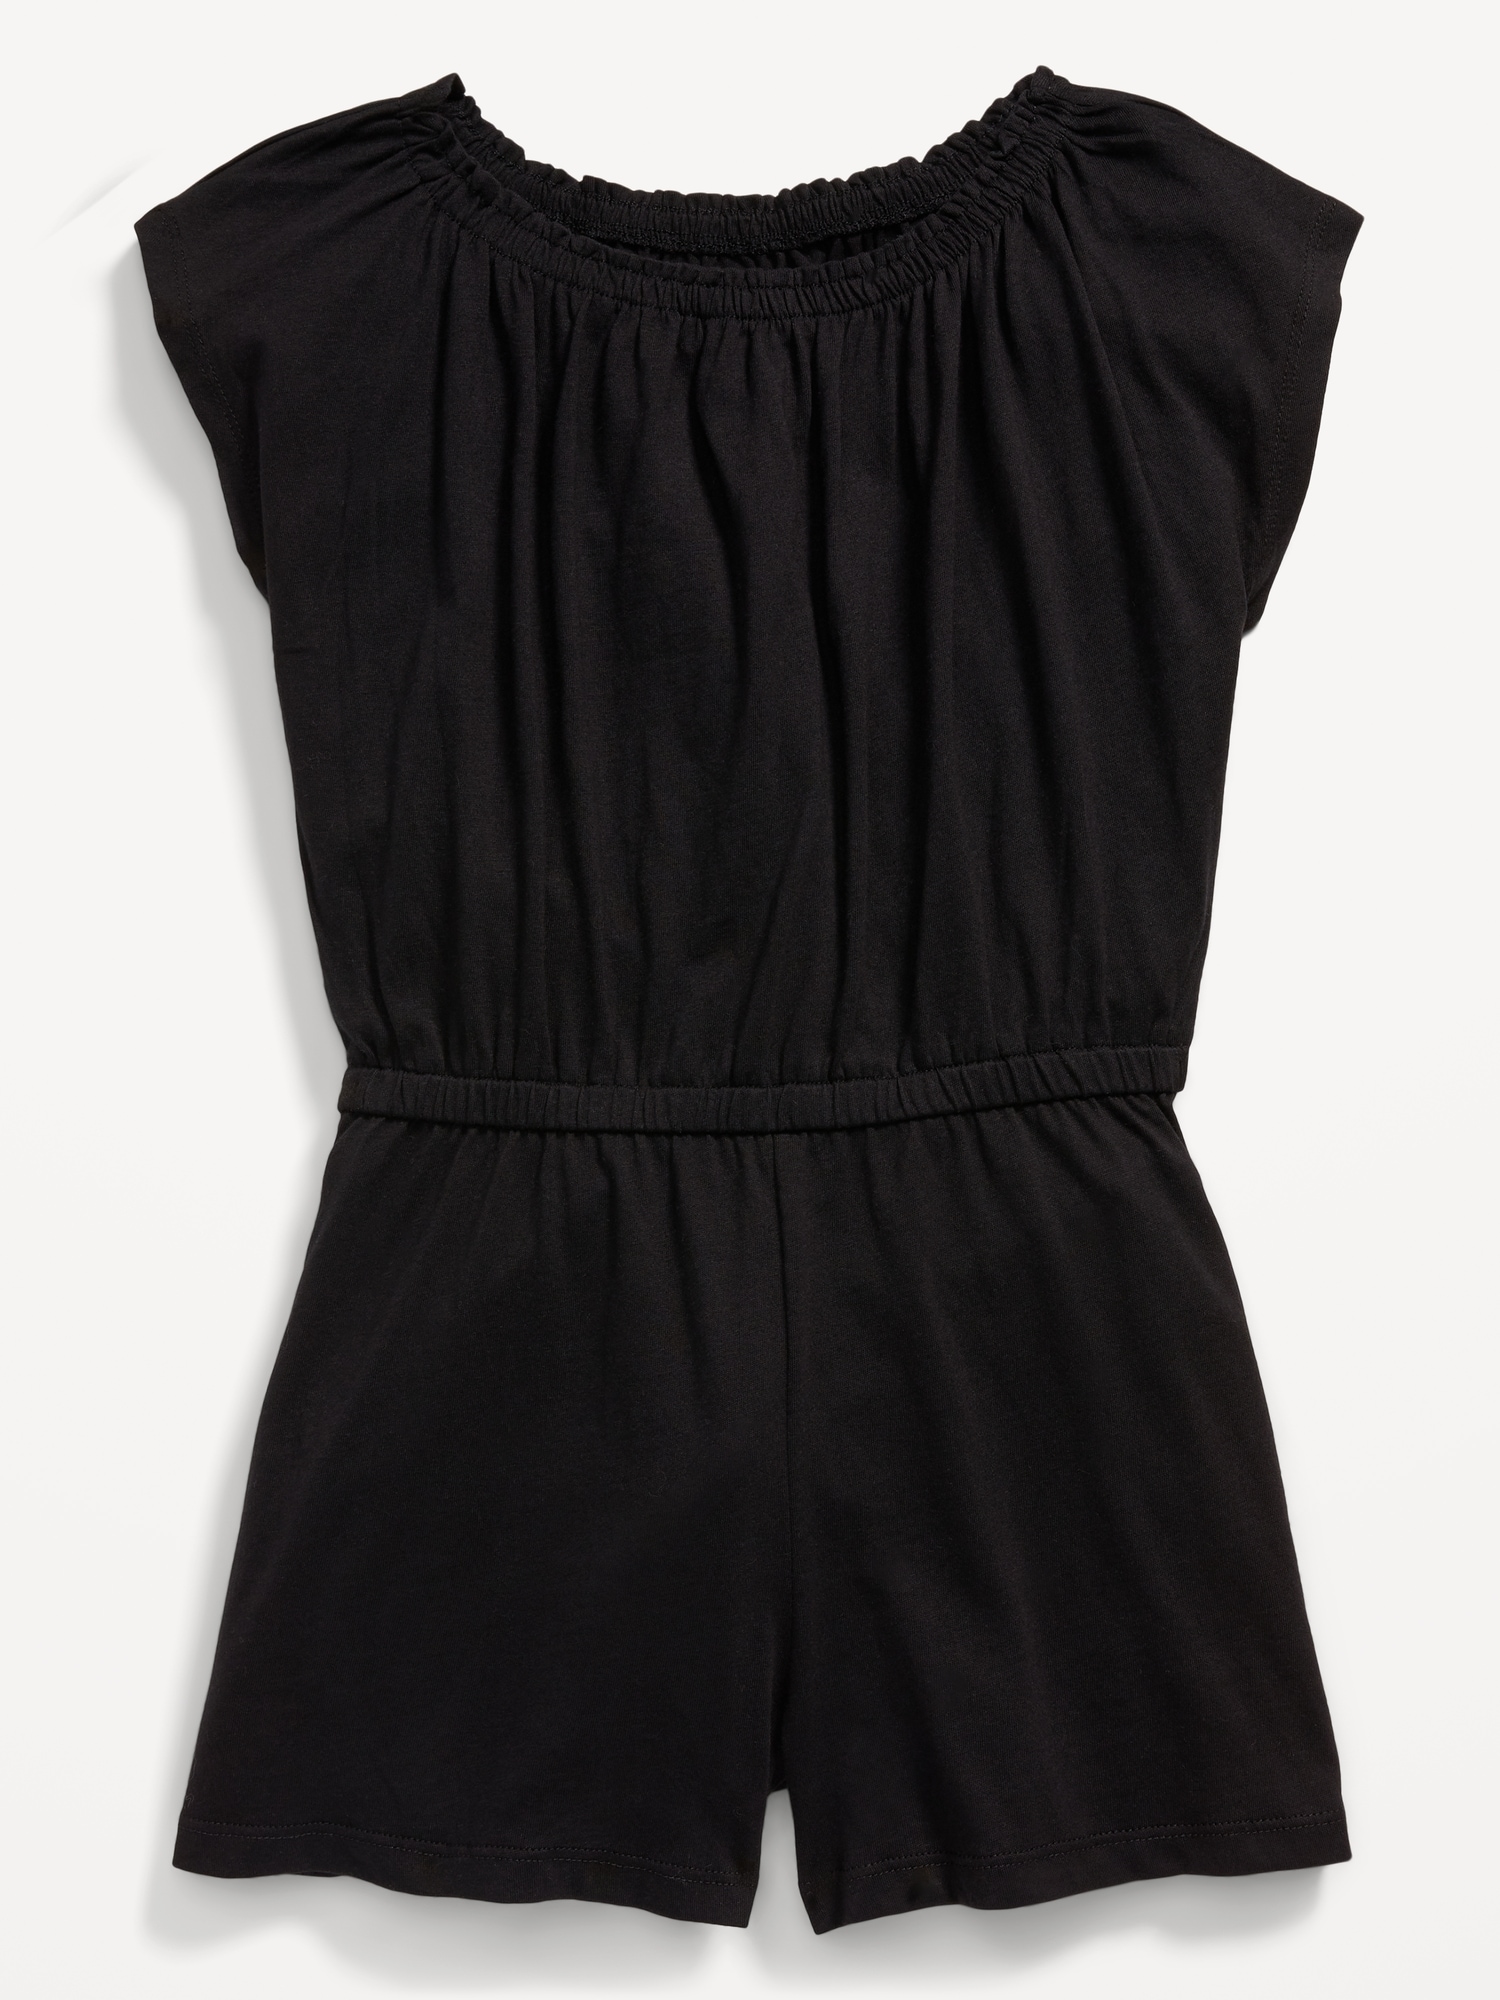 Short-Sleeve Cinched-Waist Romper for Girls